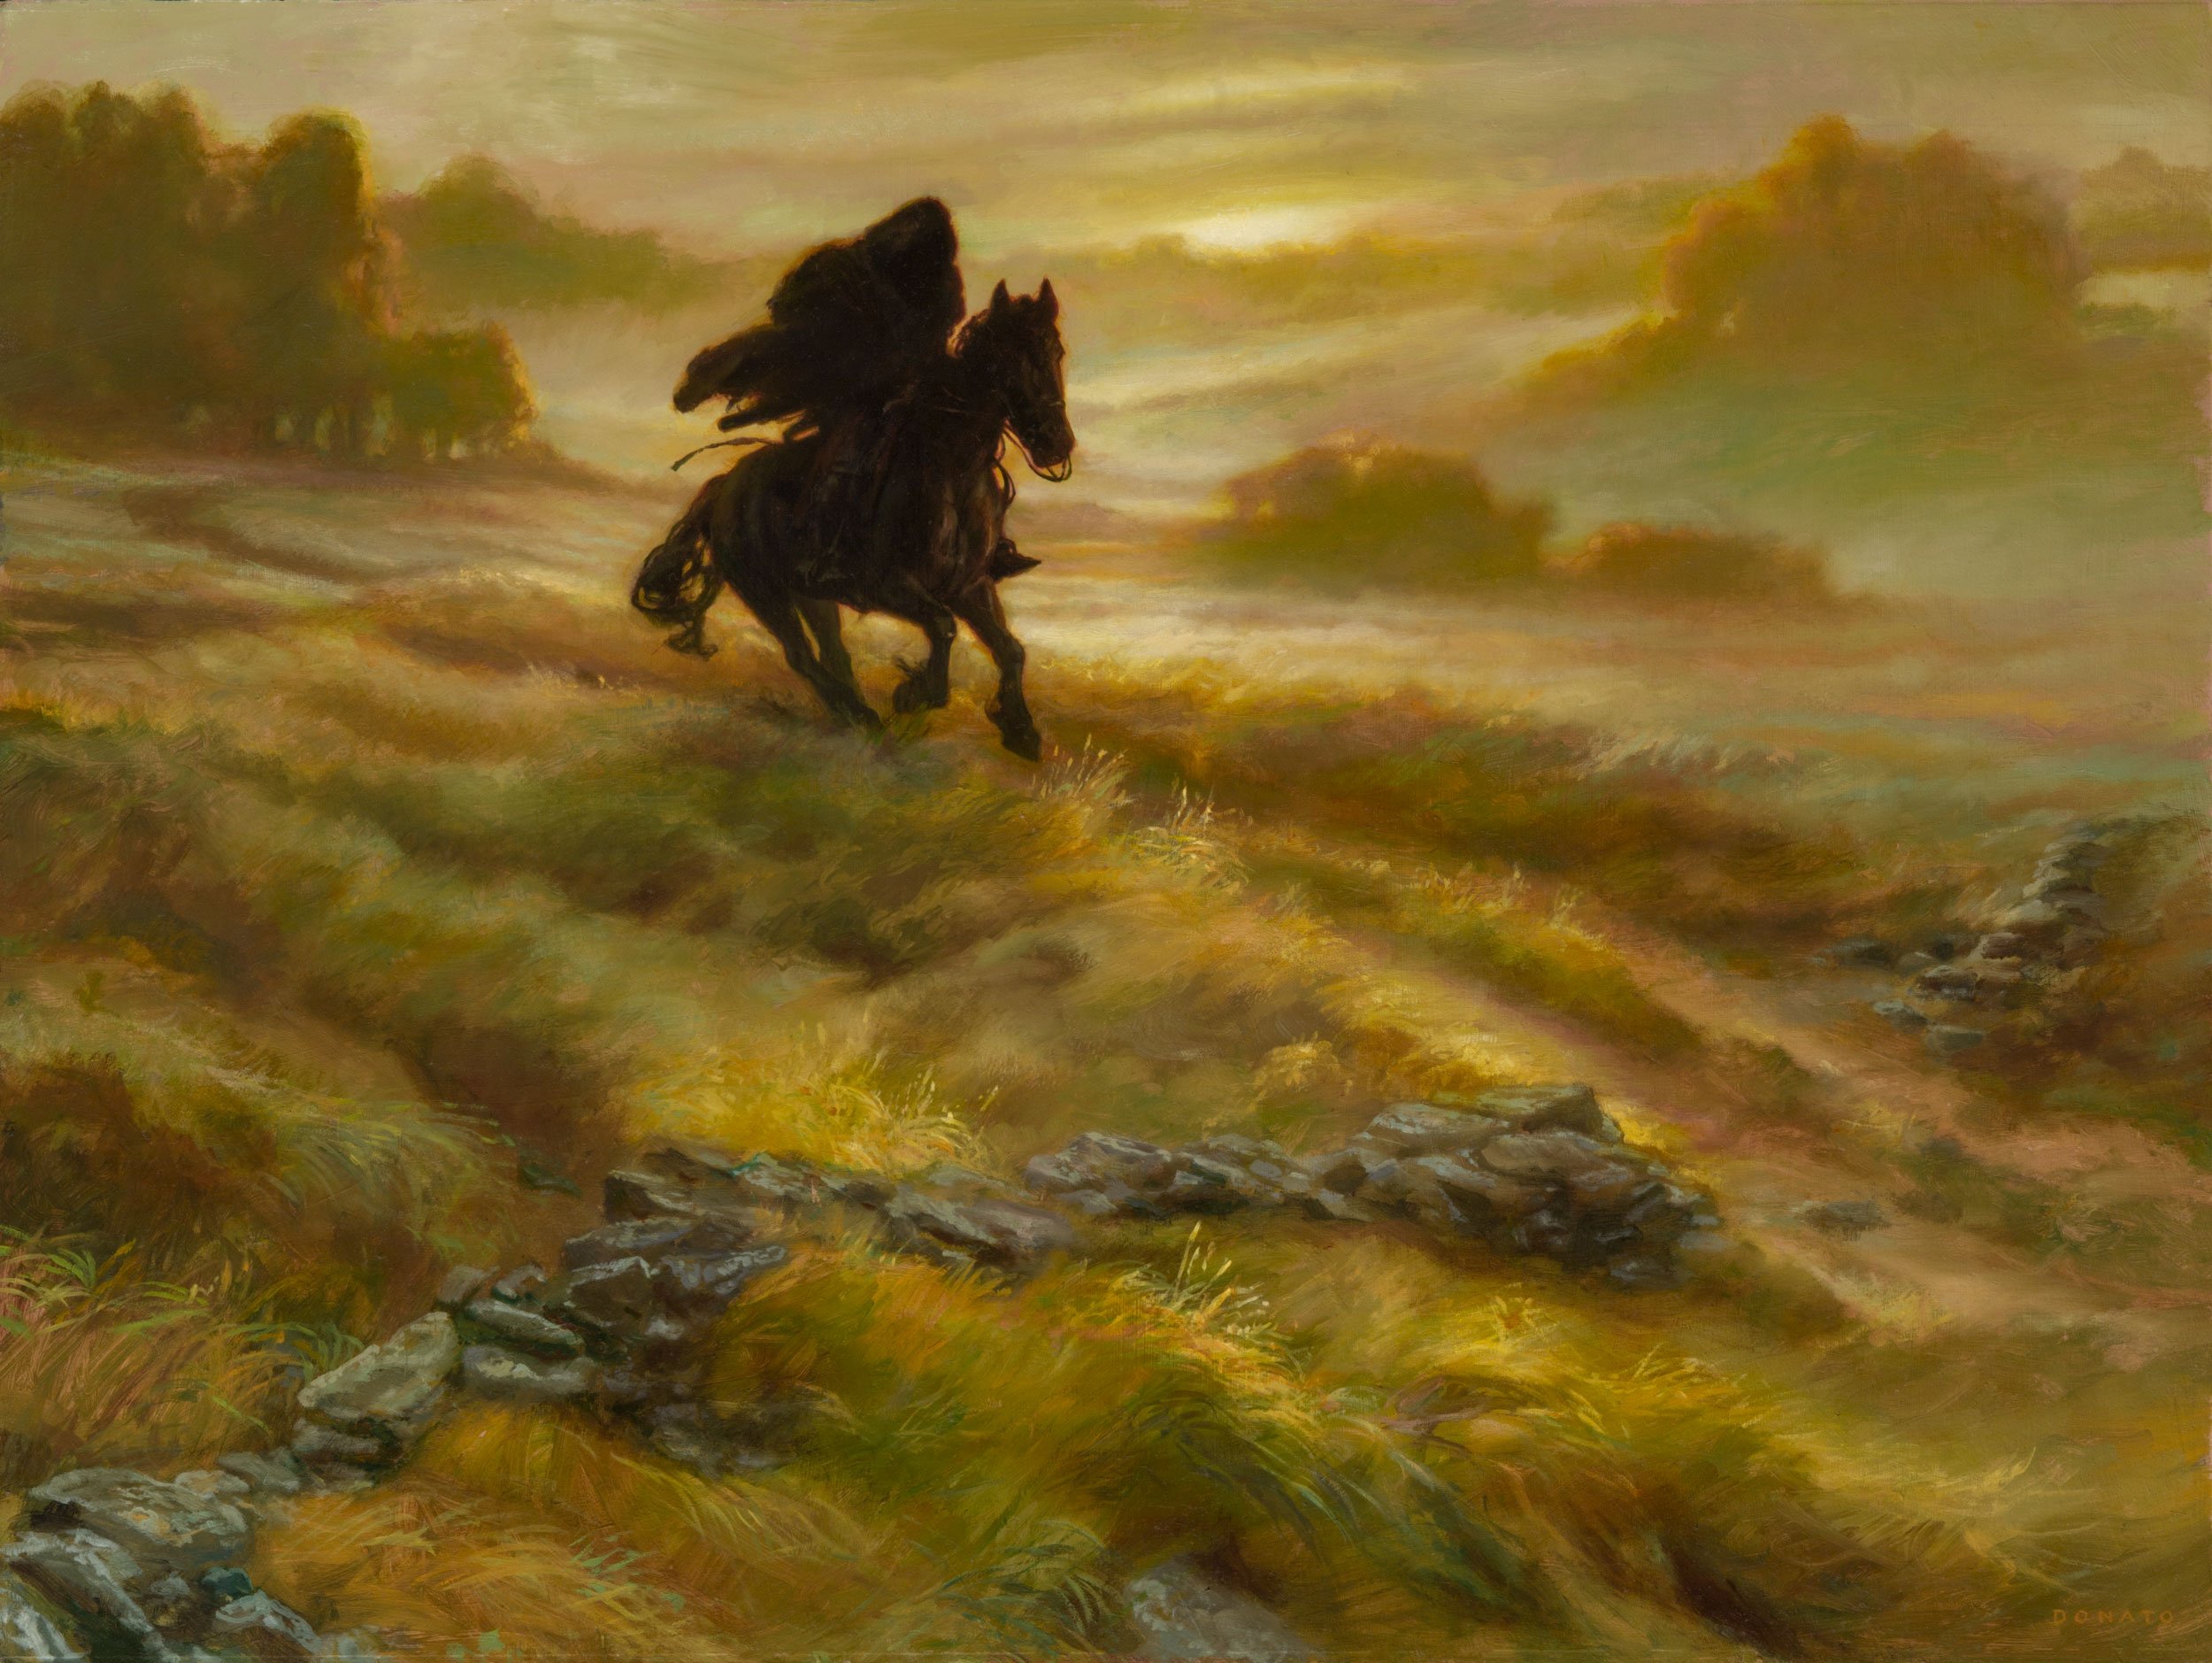 Searching for Baggins
18" x 24"  Oil on Panel  2021
original art available for purchase in the Store
